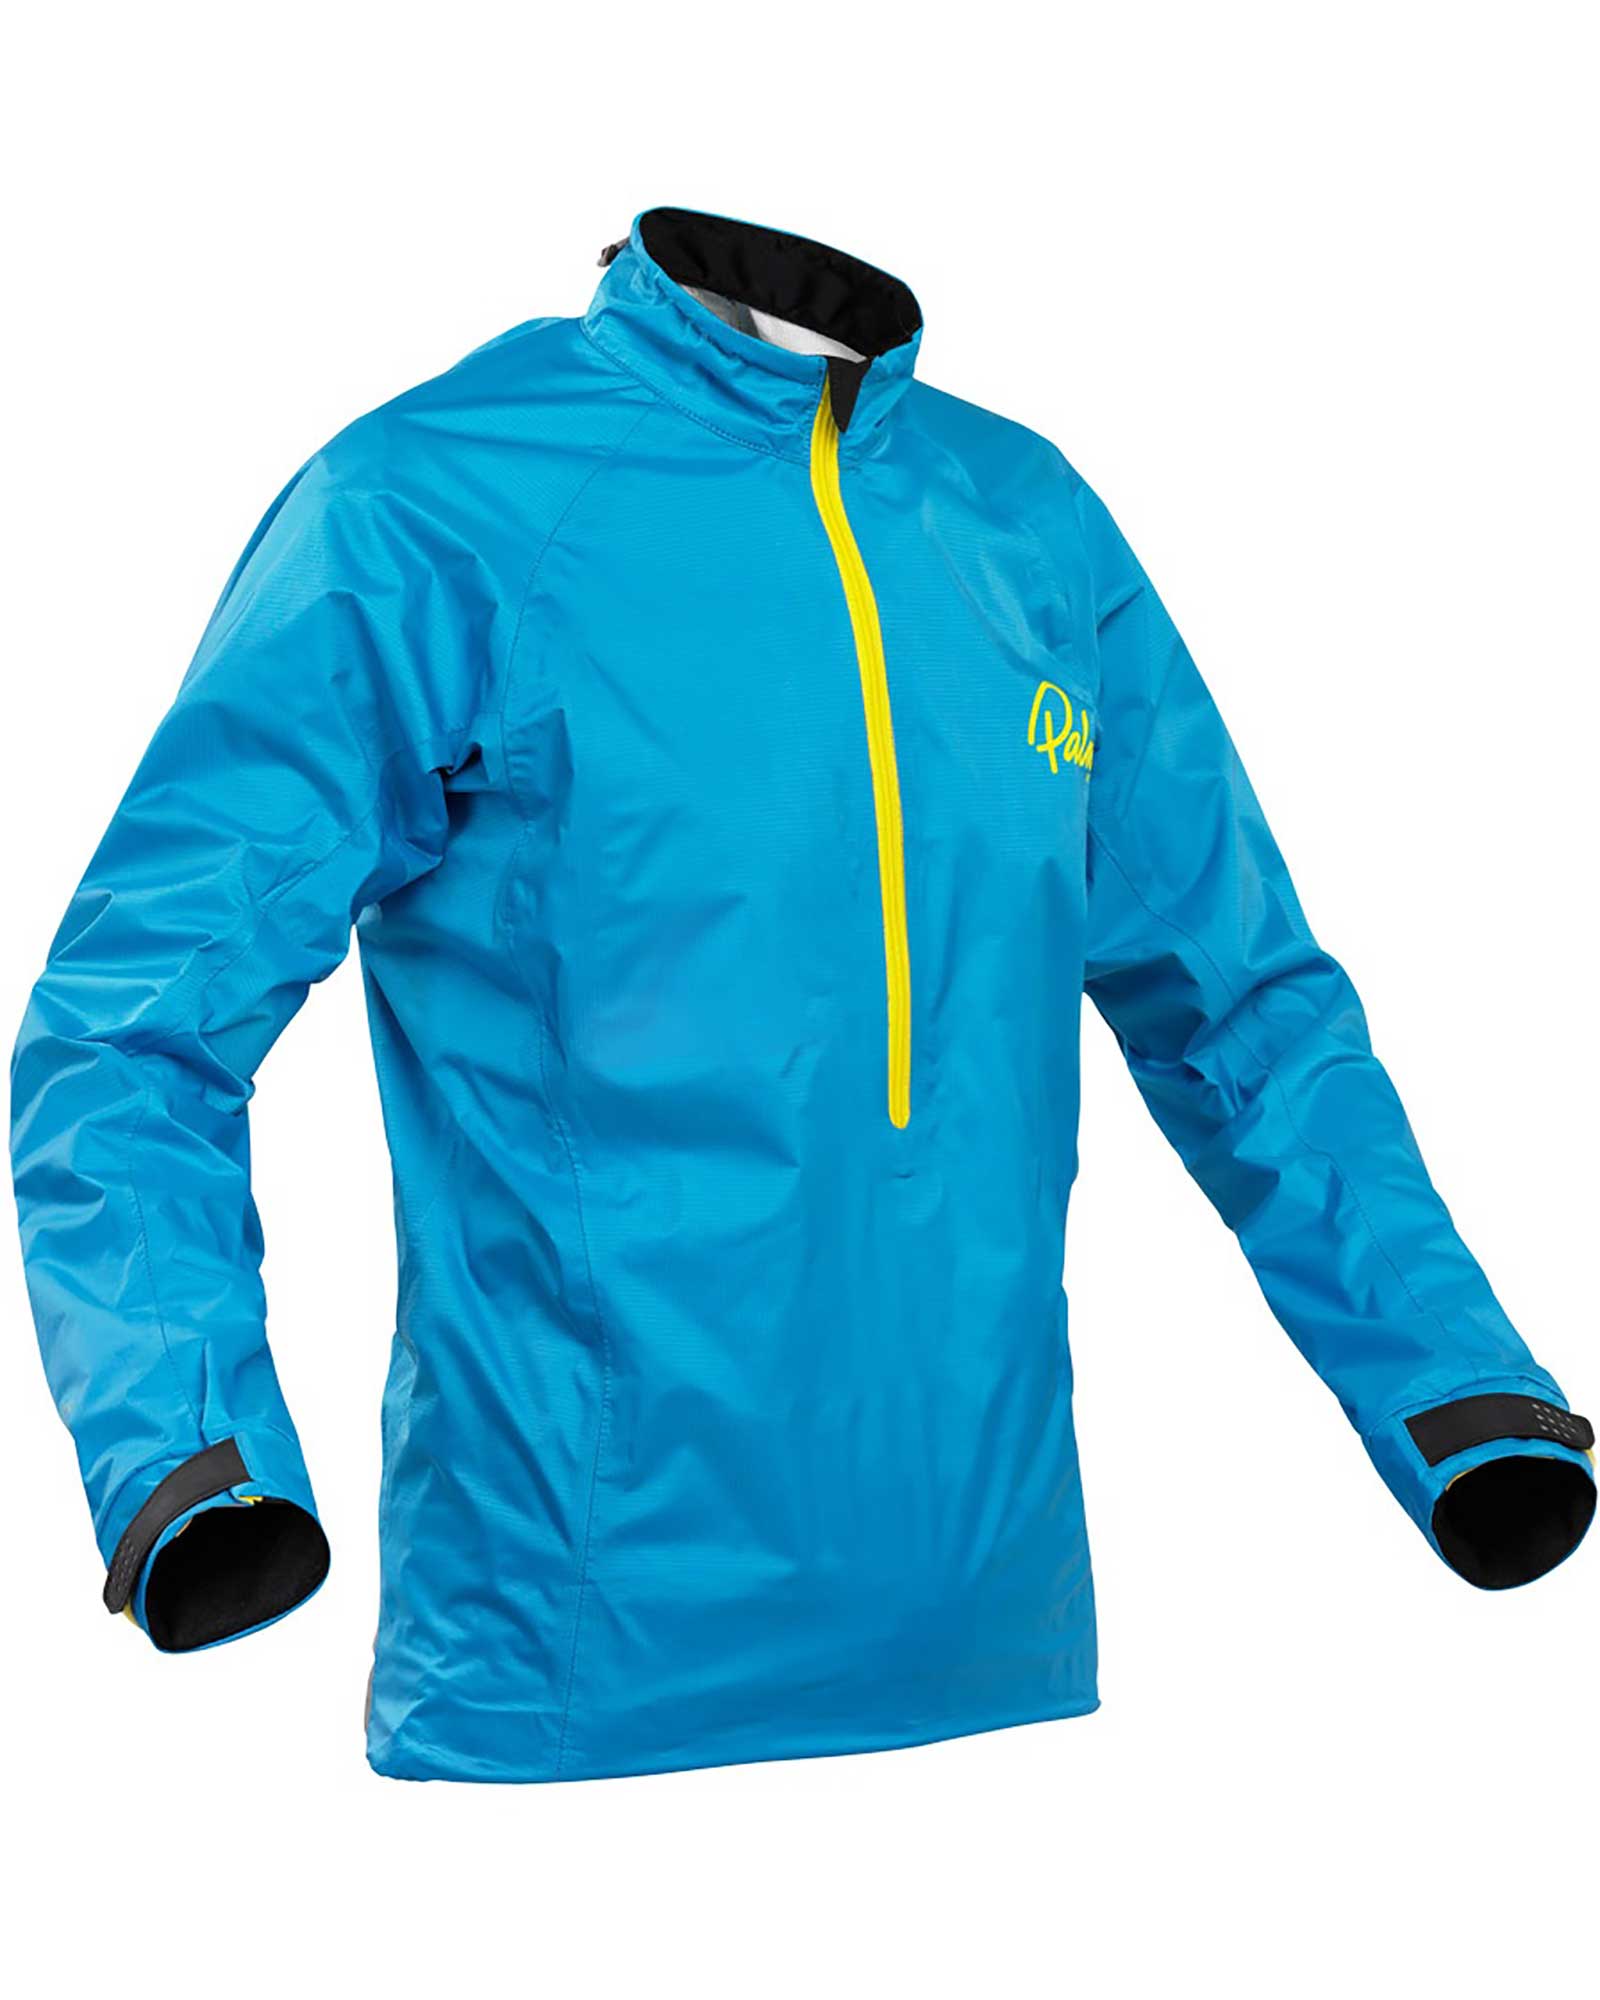 Product image of Palm Tempo Women's Jacket